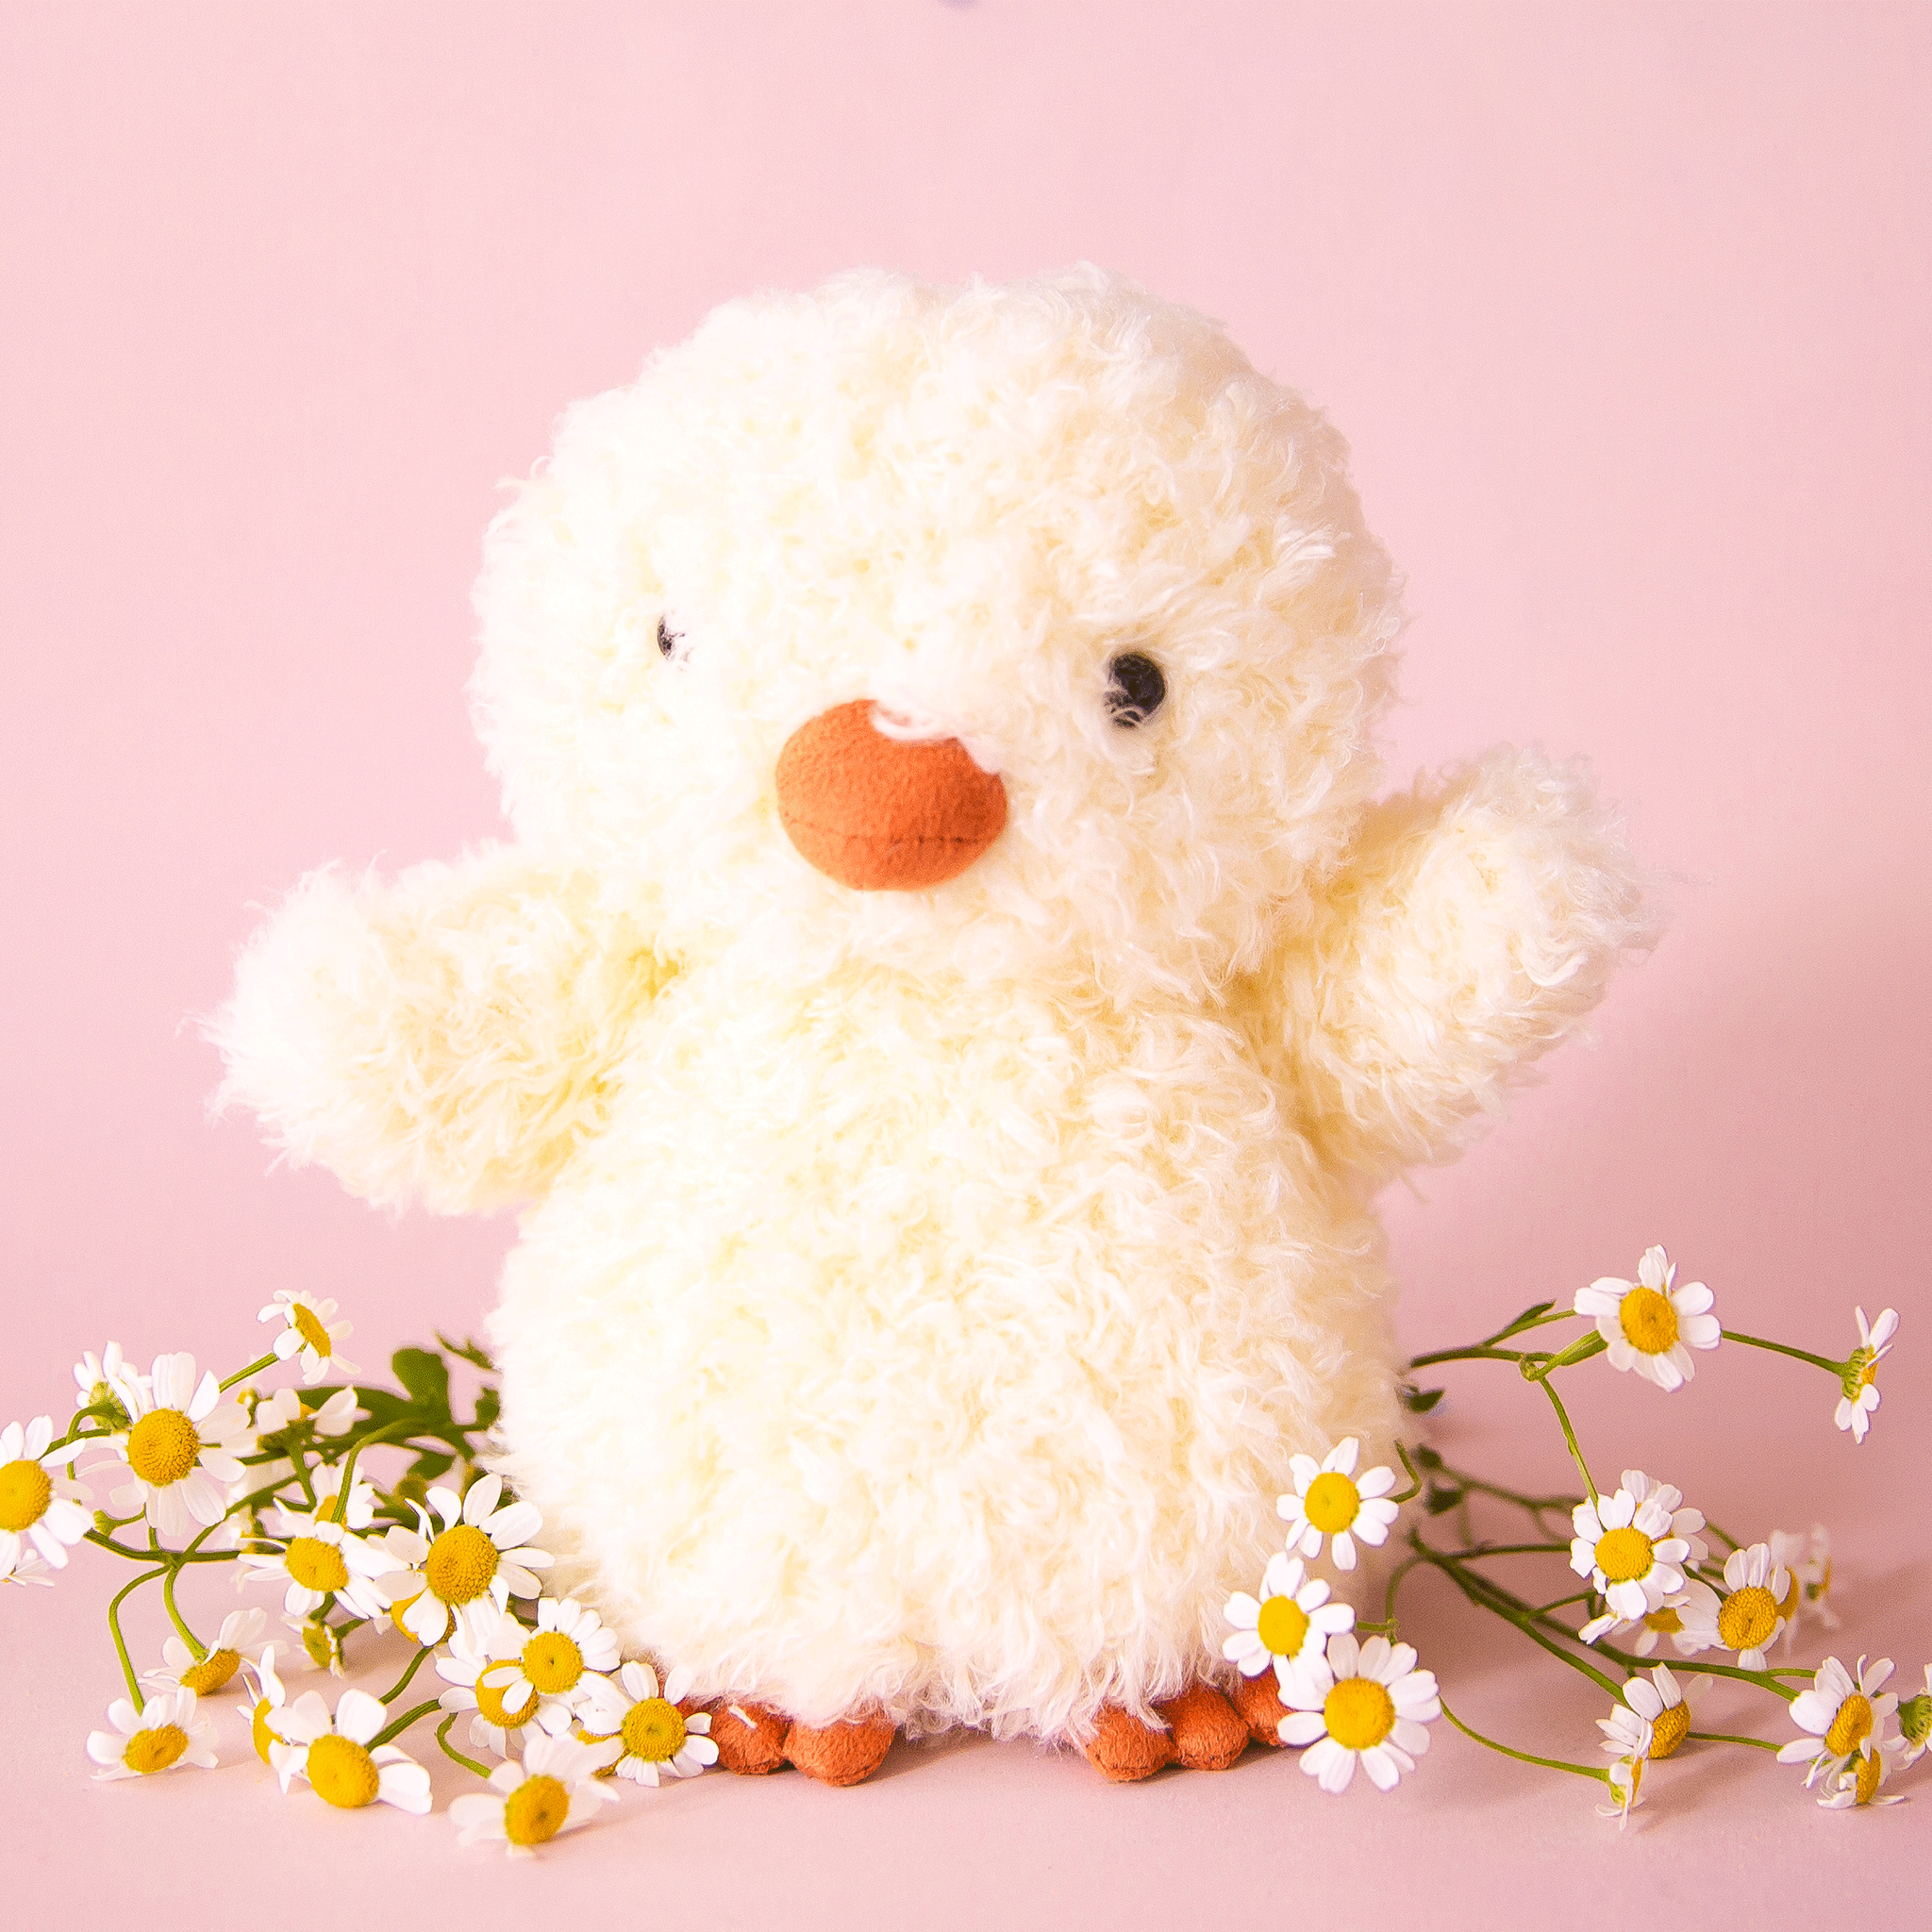 On a pink background is a super light yellow fuzzy chick stuffed animal toy with an orange beak and feet.